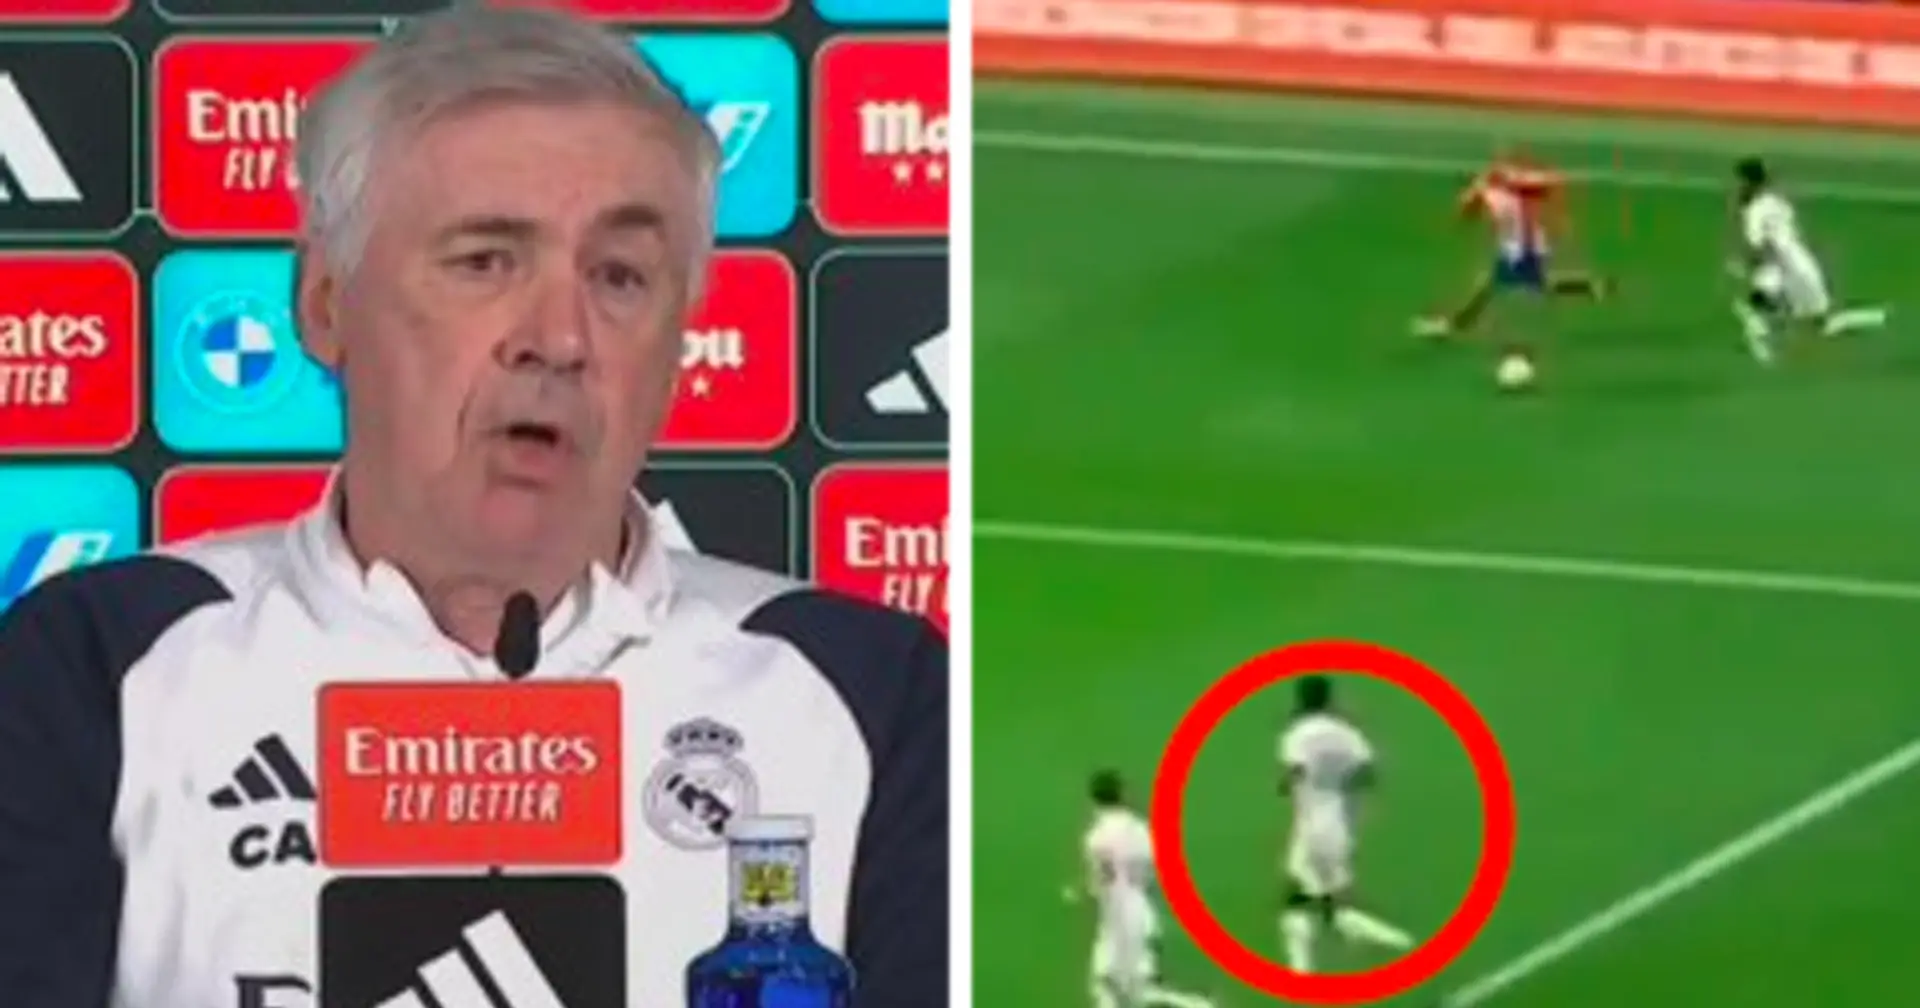 Ancelotti names one player who could've defended Griezmann goal better – not Vinicius